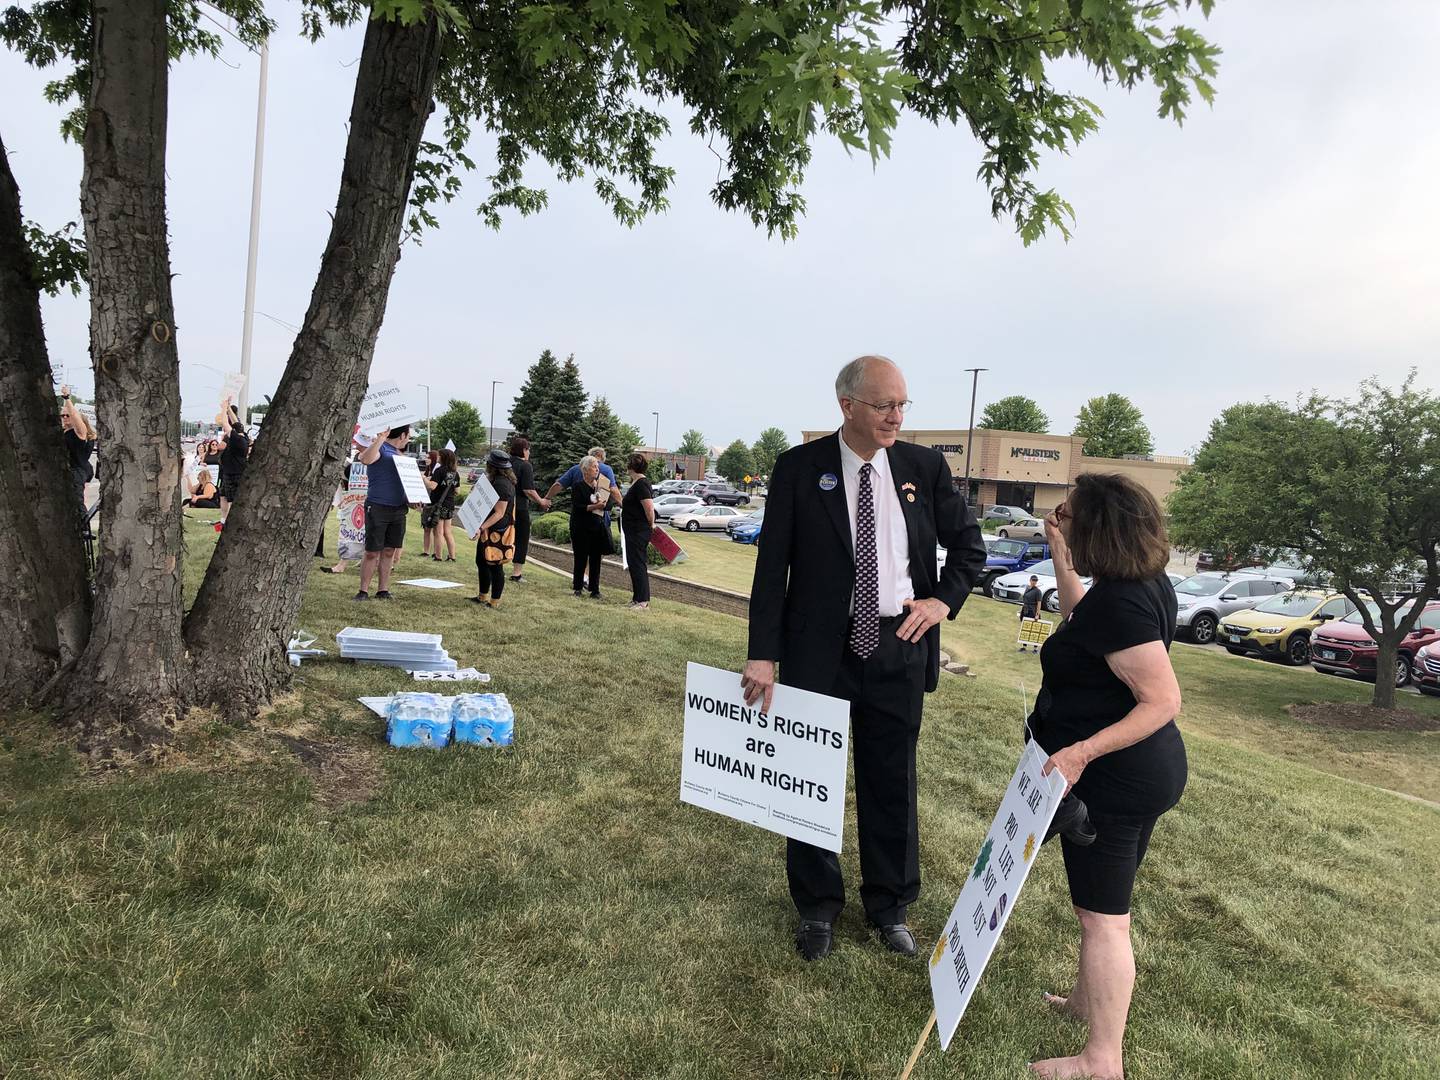 U.S. Rep. Bill Foster, D-Naperville, was among the protesters gathered Monday, July 4, 2022, on Route 14 in Crystal Lake to rally against the decision overturning Roe v. Wade in late June.